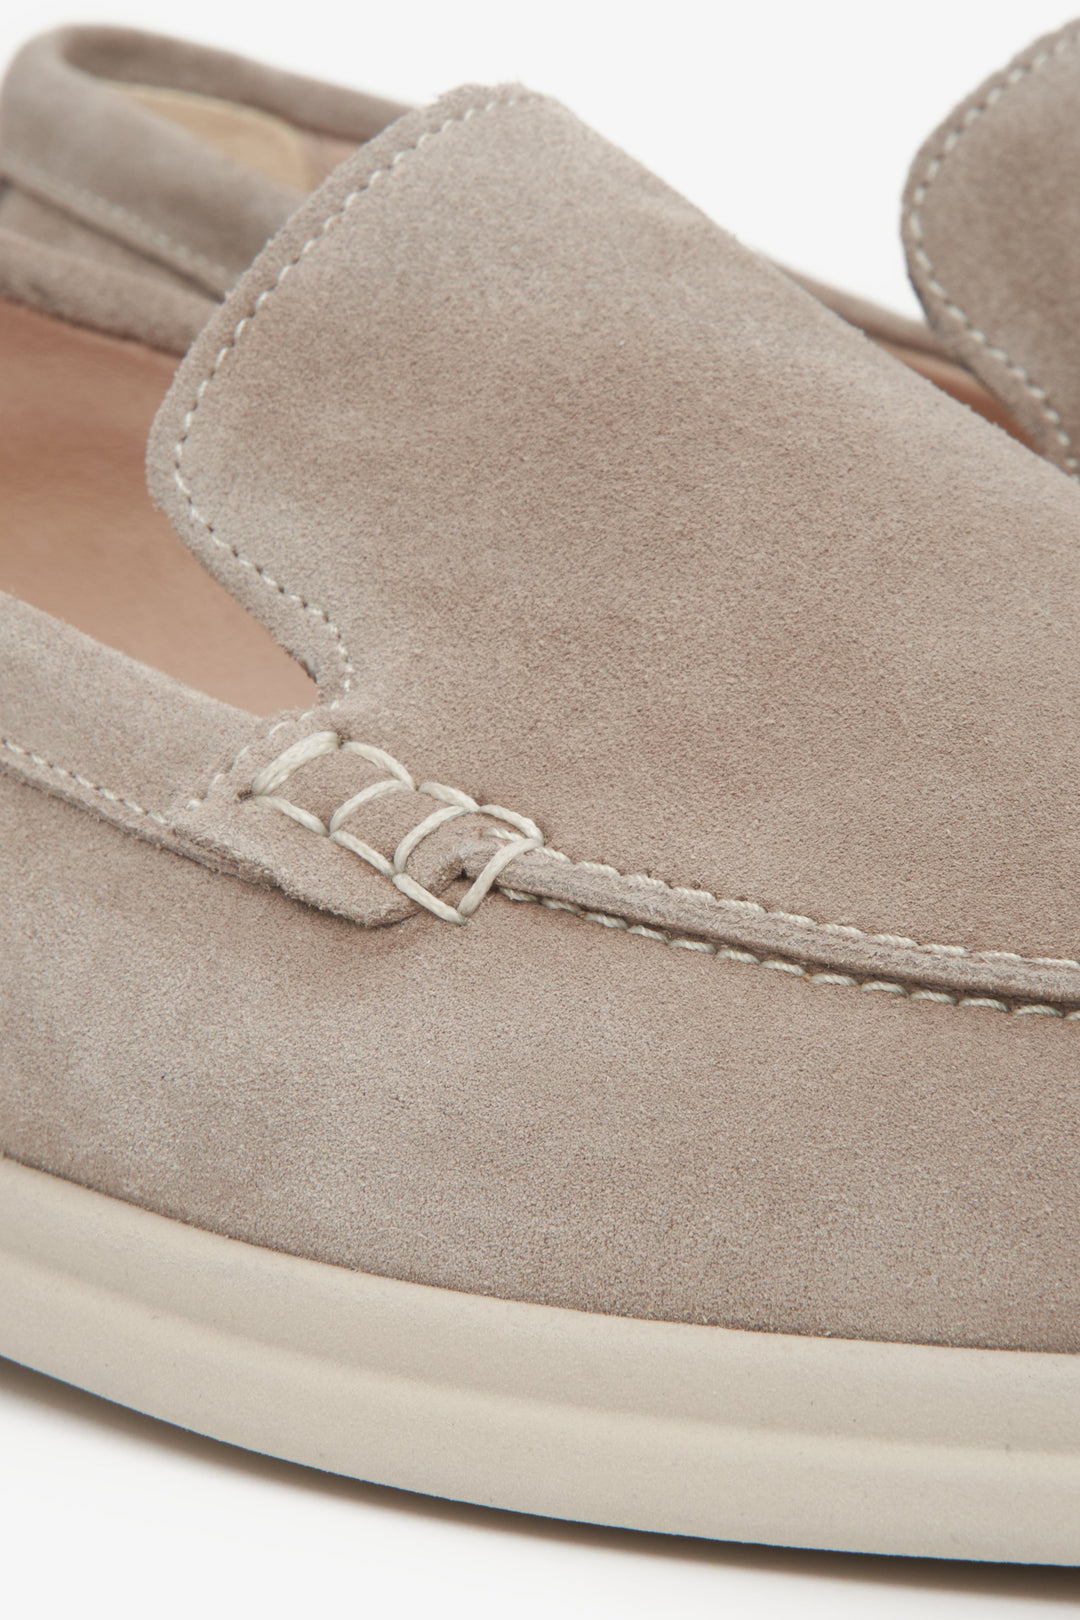 Men's beige velvet moccasins - close-up of the stitching system and finishing touches of the model.